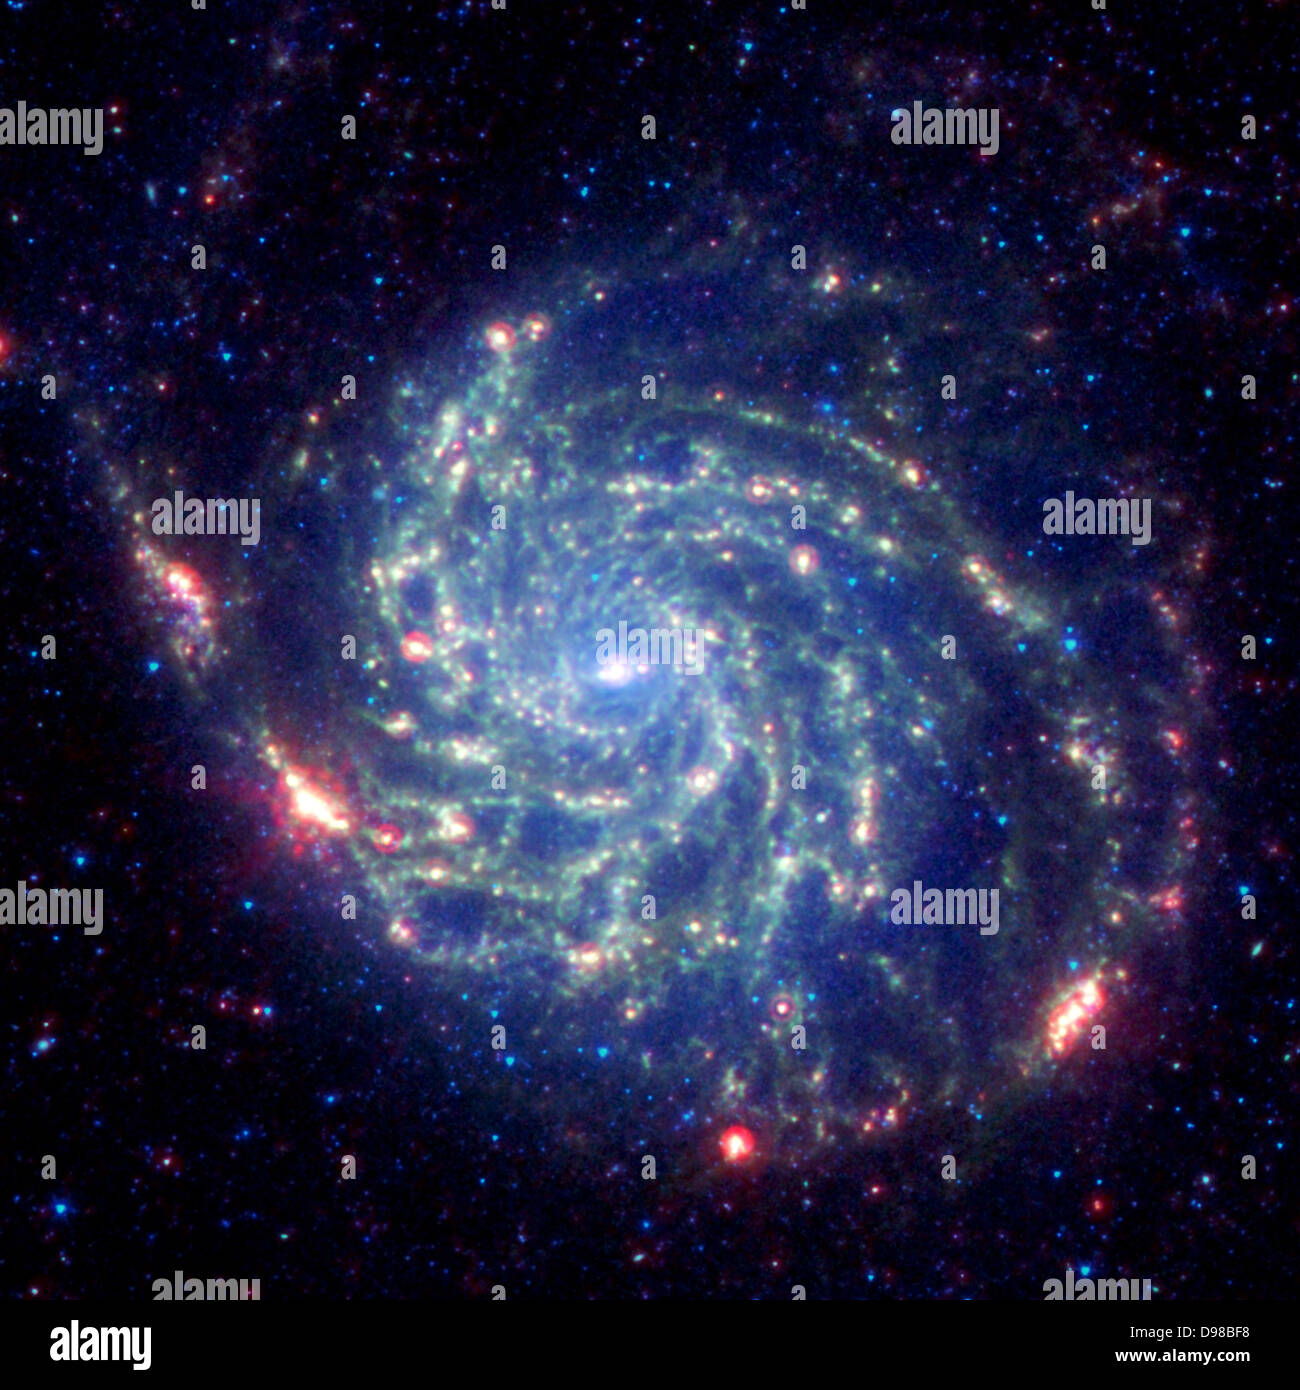 The galaxy Messier 101 is a swirling spiral of stars, gas, and dust. Messier 101 is nearly twice as wide as our Milky Way galaxy. Spitzer's view, taken in infrared light, reveals the galaxy's delicate dust lanes as yellow-green filaments. Such dense dust clouds are where new stars can form. In this image, dust warmed by the light of hot, young stars glows red. The rest of the galaxy's hundreds of billions of stars are less prominent and form a blue haze. Astronomers can use infrared light to examine the dust clouds where stars are born. Stock Photo